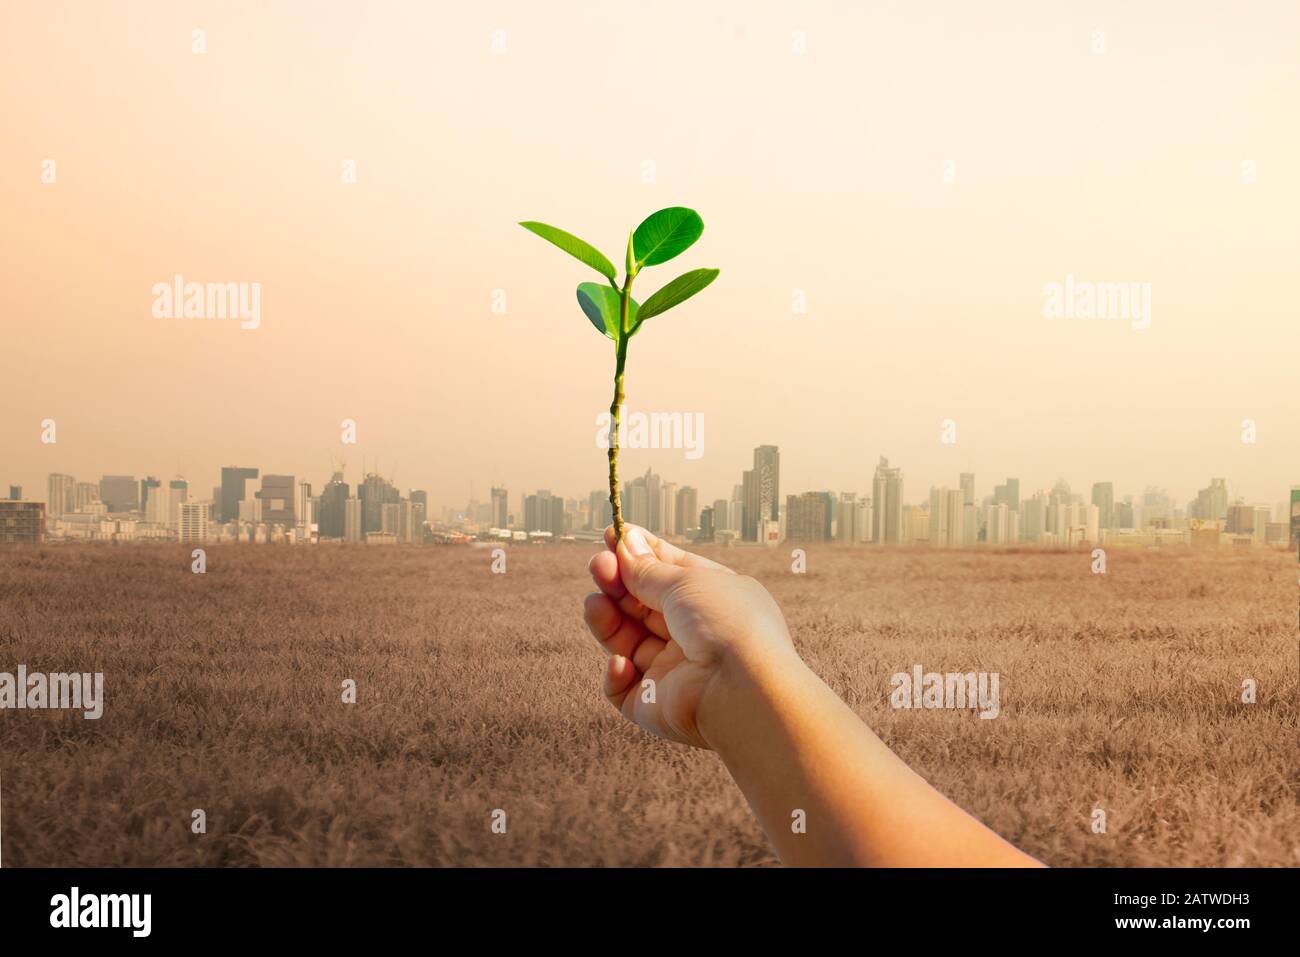 Raise hands with trees, with the background of many large building. Global warming and pollution theme .Conceptual image symbolizing  global warming l Stock Photo